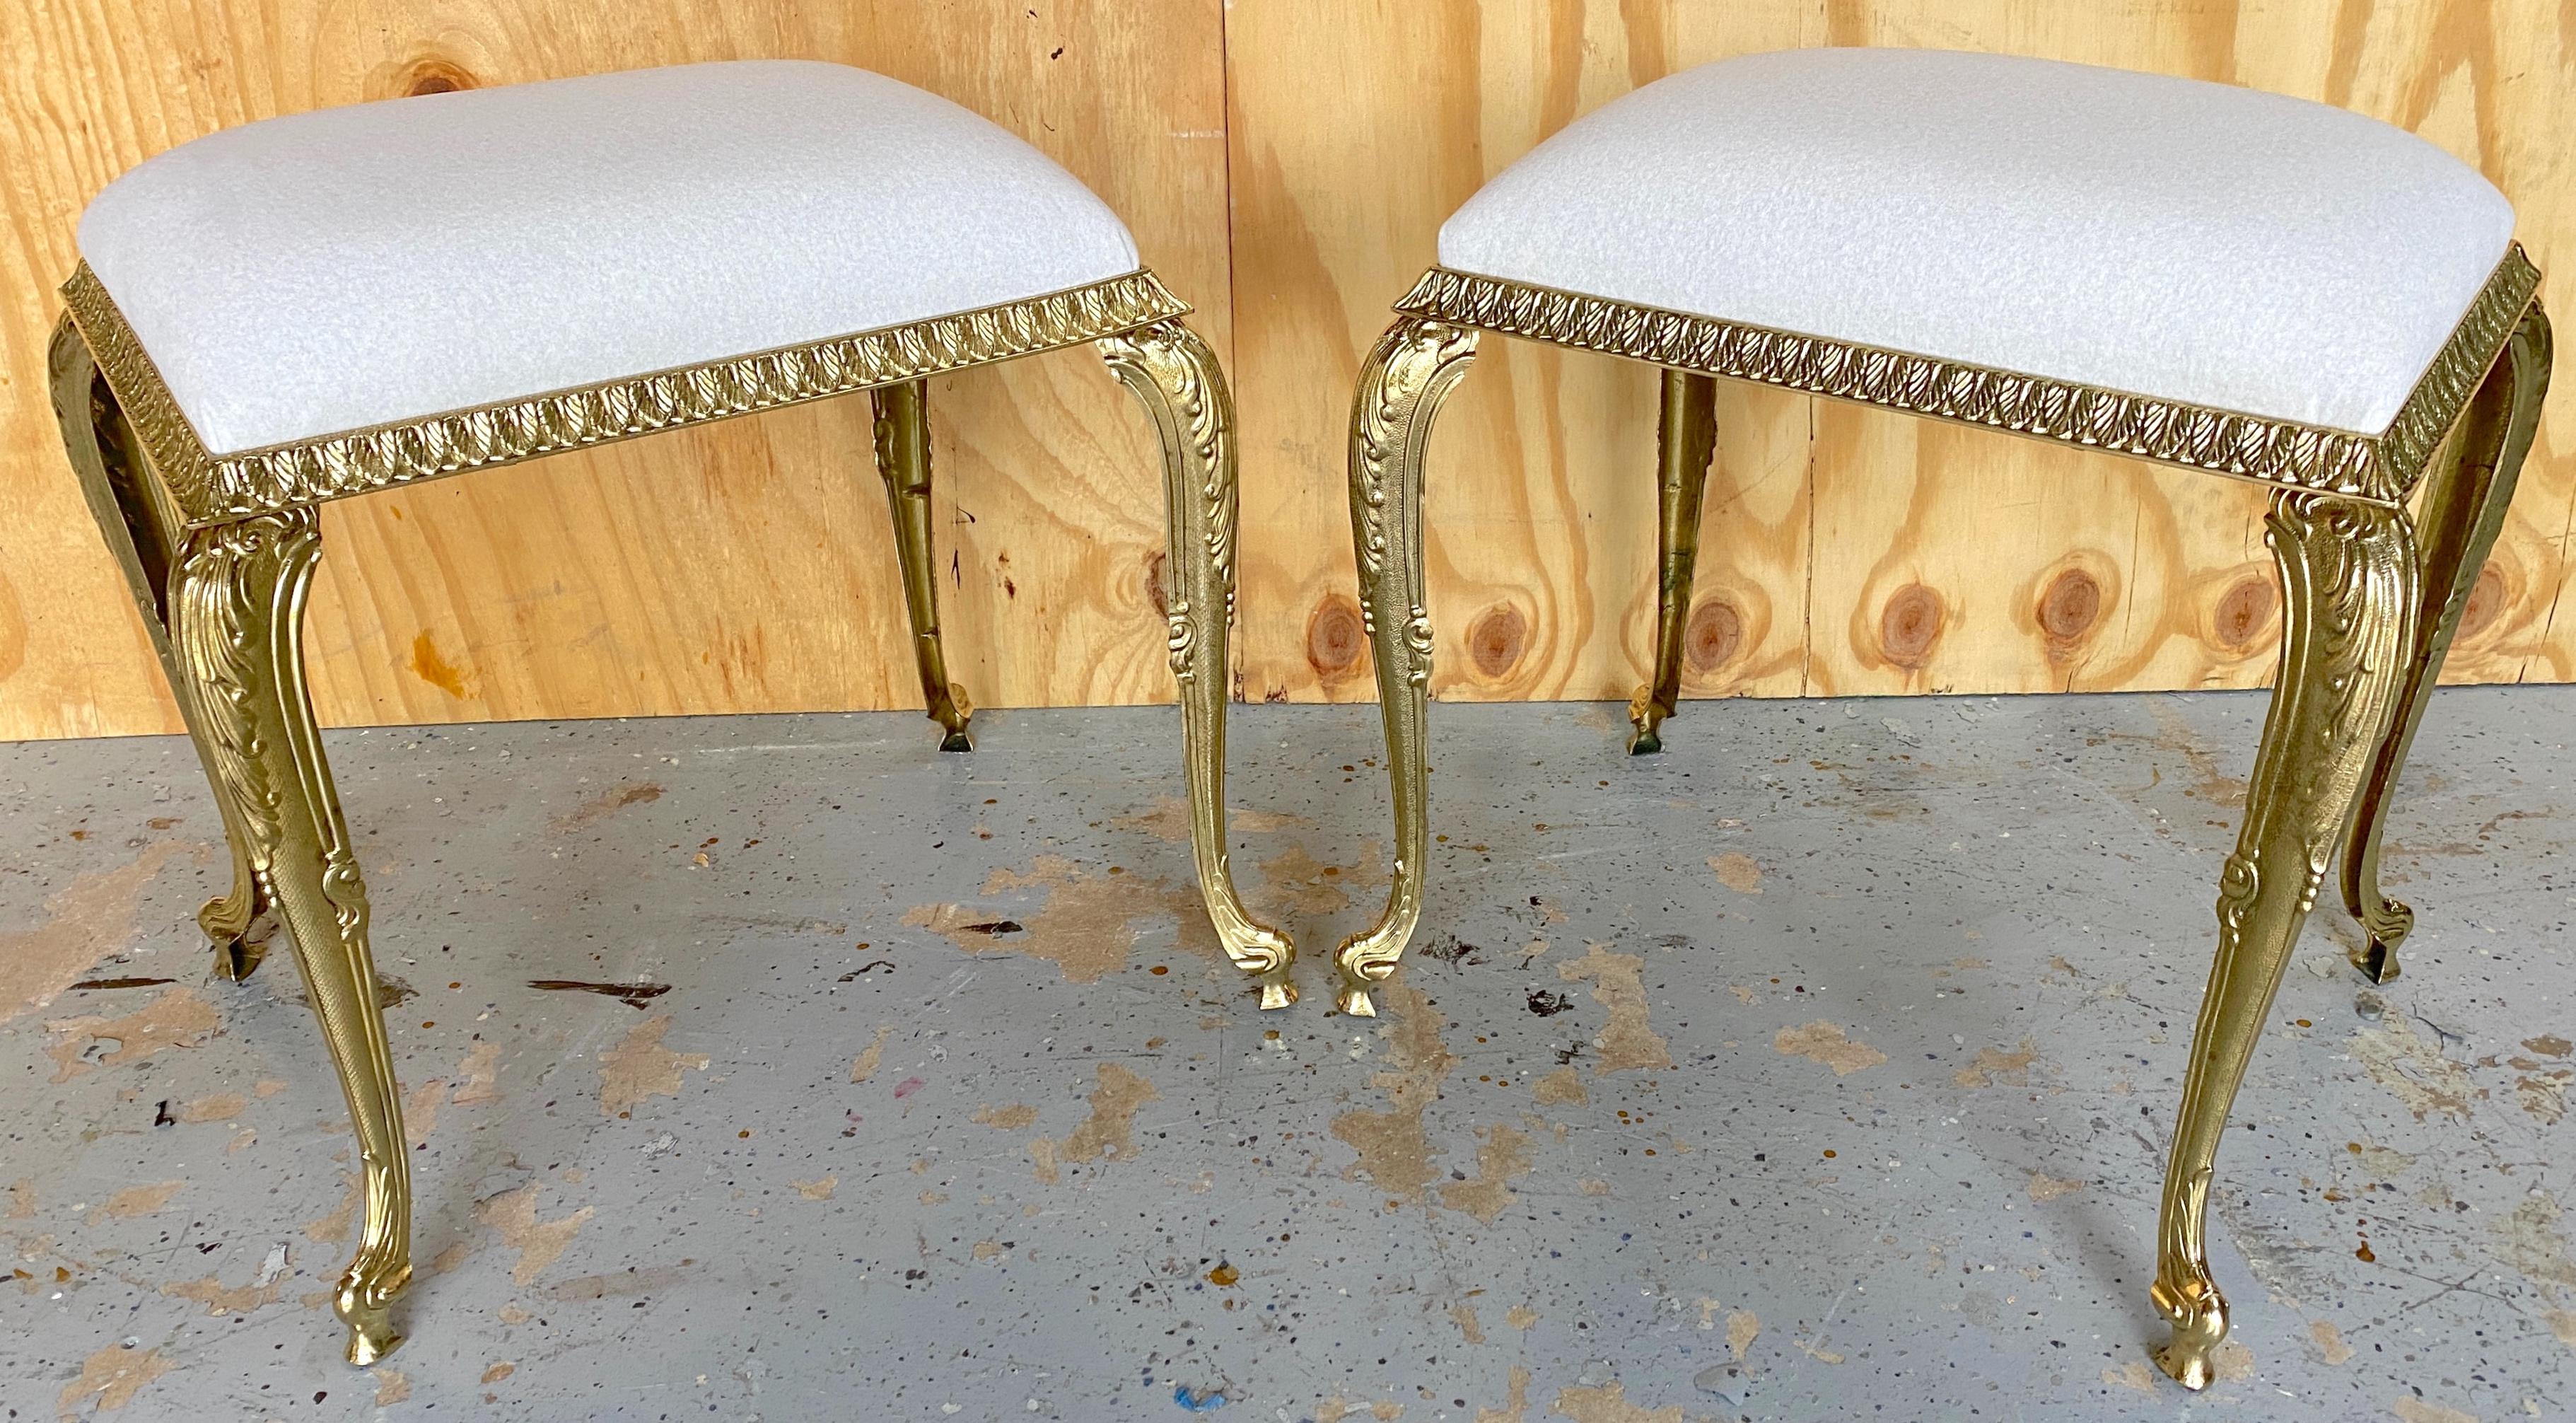 Pair of French Neoclassical Bronze Benches /Ottomans Kravet Cashmere Upholstery 
France, 1950s

A stunning pair of French neoclassical bronze benches/ ottomans, originating from the 1950s, exuding timeless elegance and sophistication. Each piece